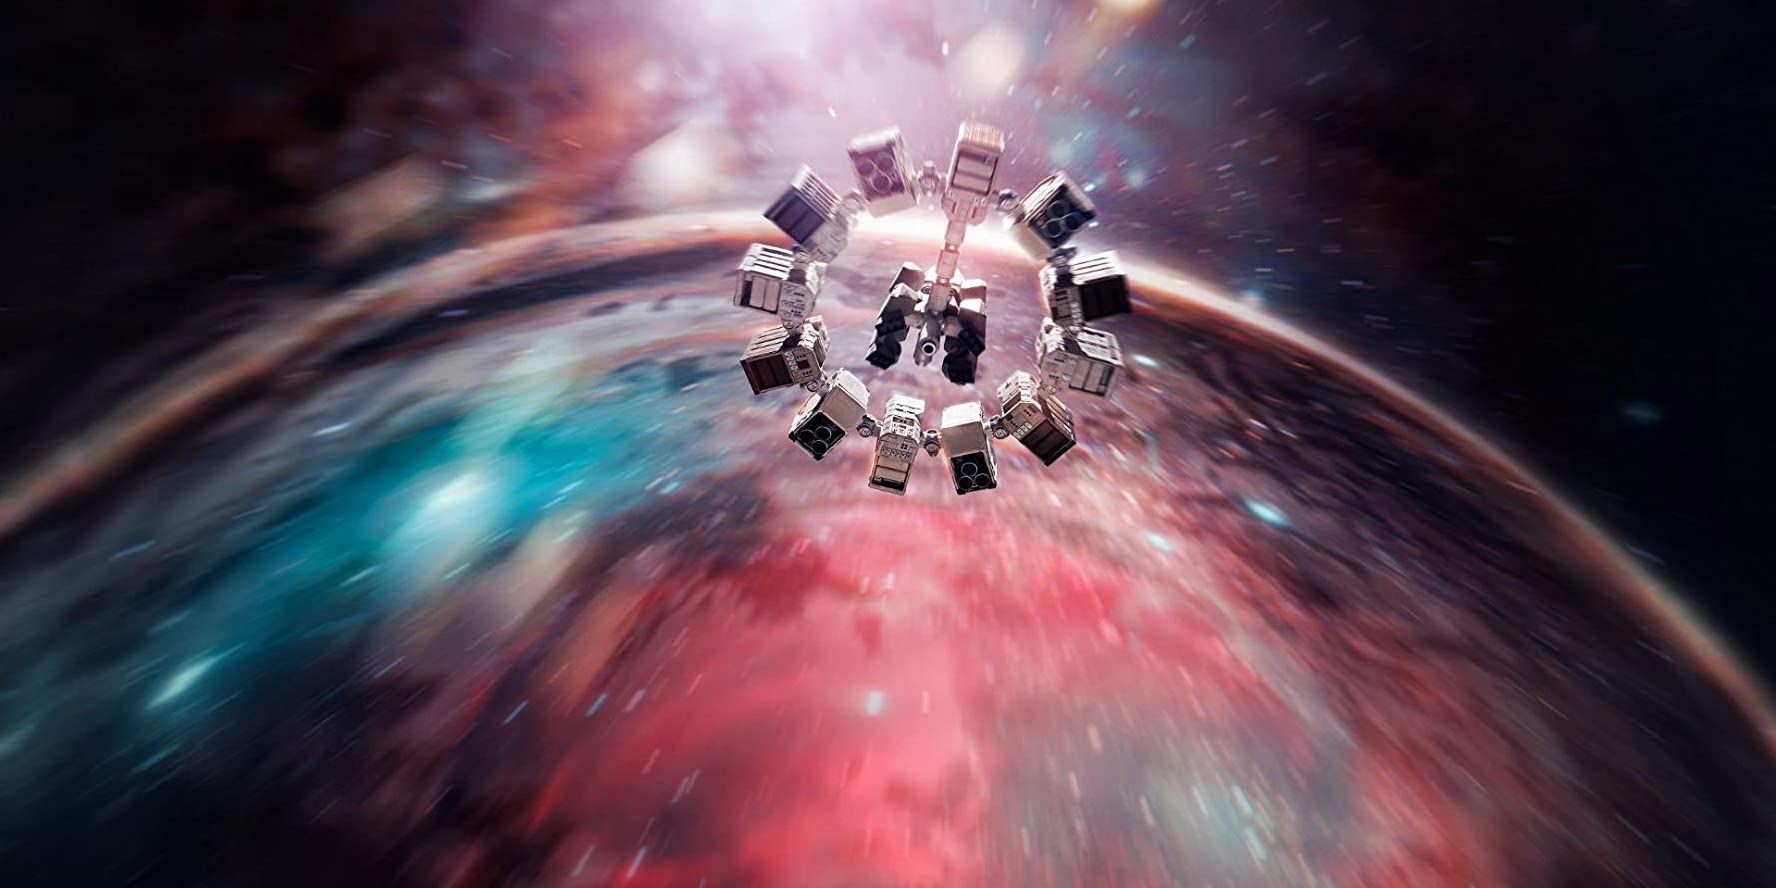 The ship travels into the wormhole in Interstellar